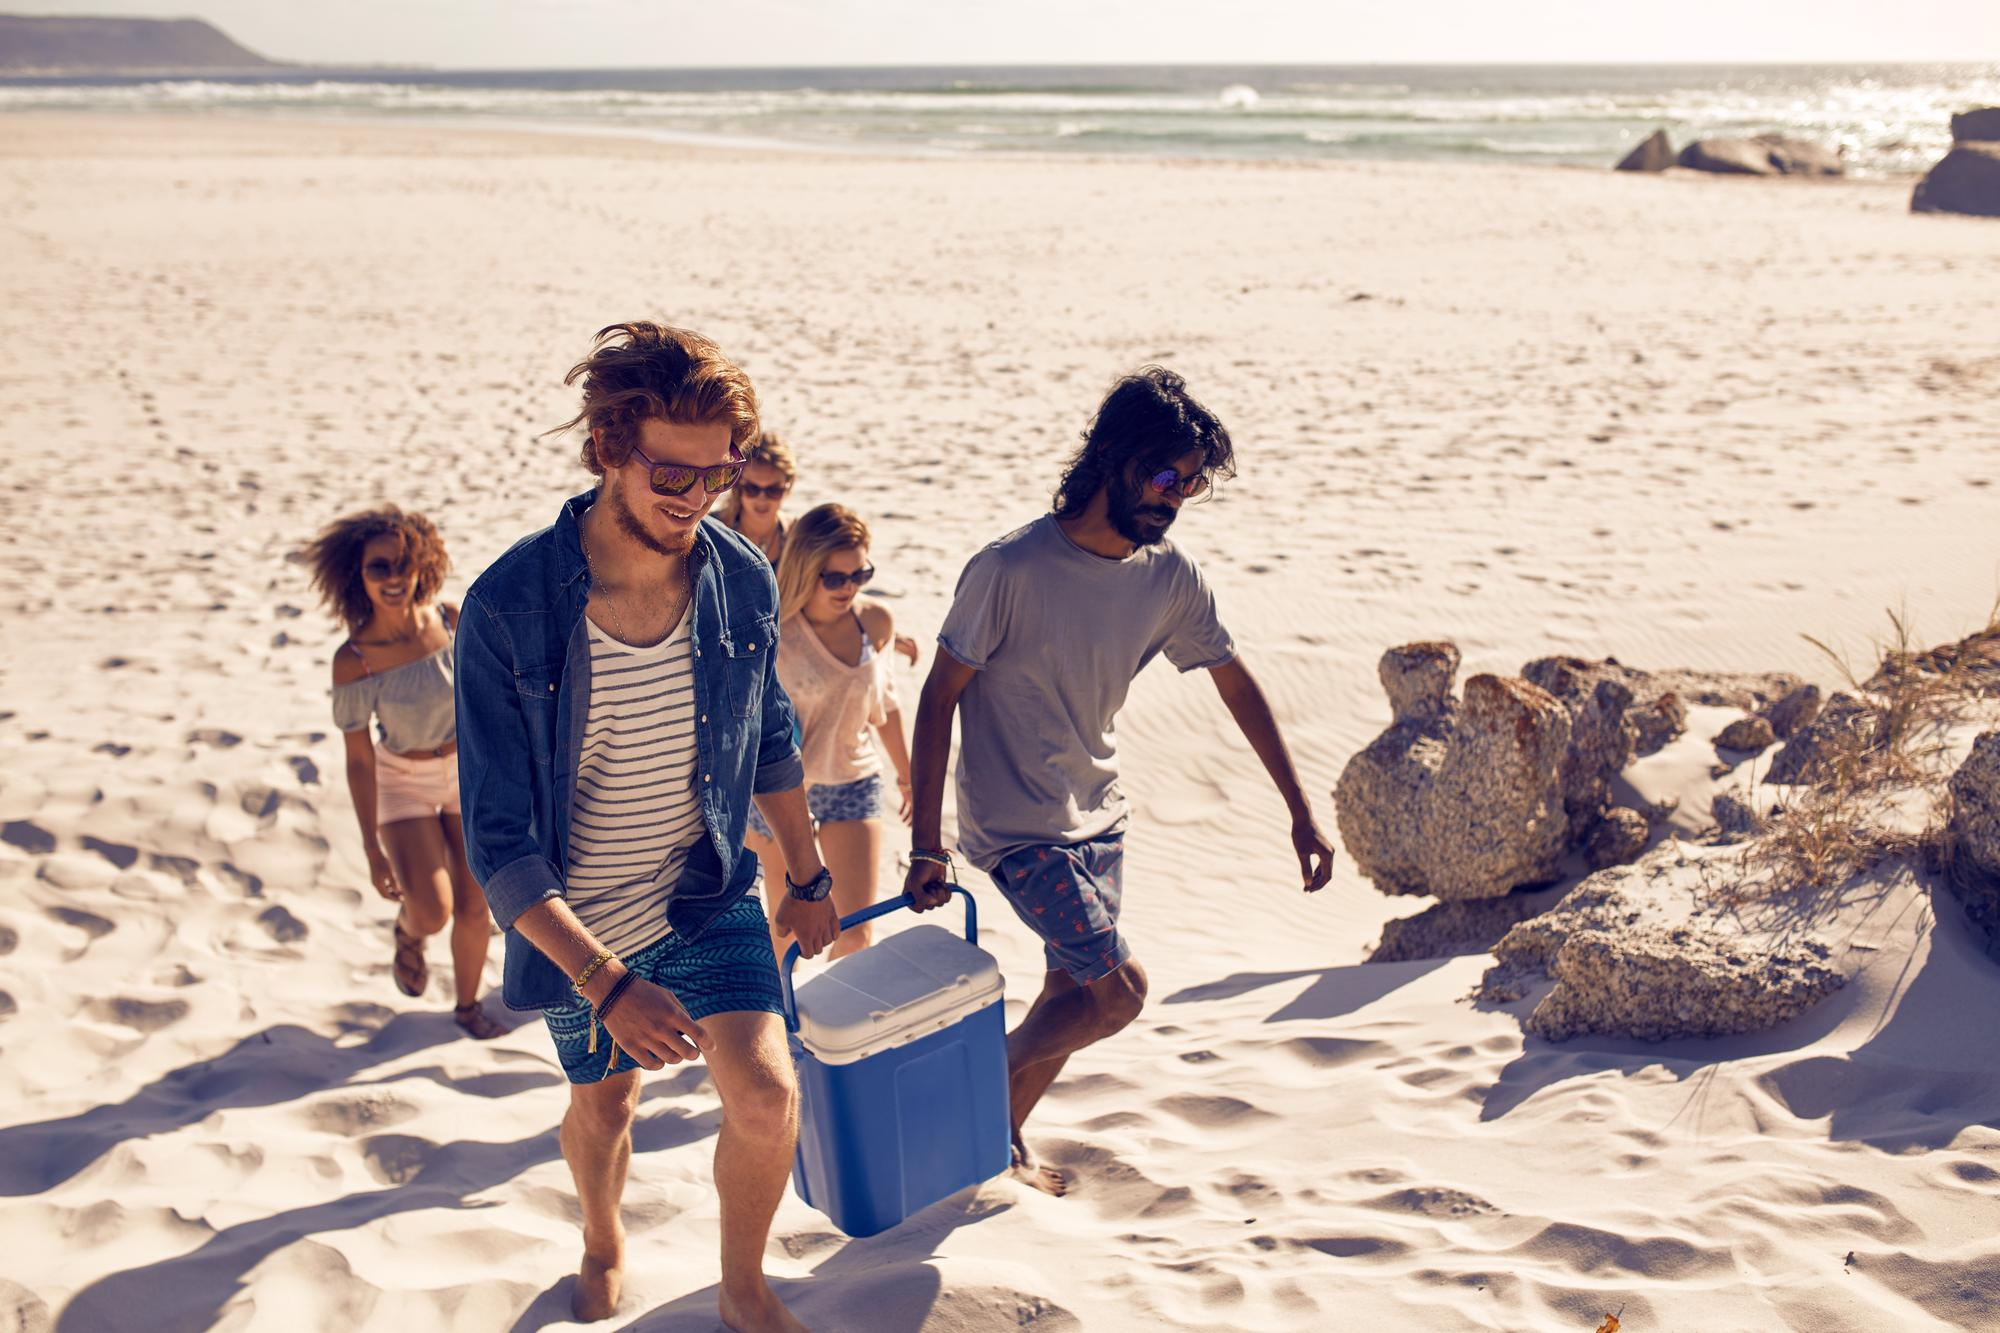 https://blog.brandor.com/hubfs/group-people-carrying-cooler-party-beach-two-young-men-carrying-cooler-with-female-friends-back-looking-spot-picnic-sea-shore.jpg